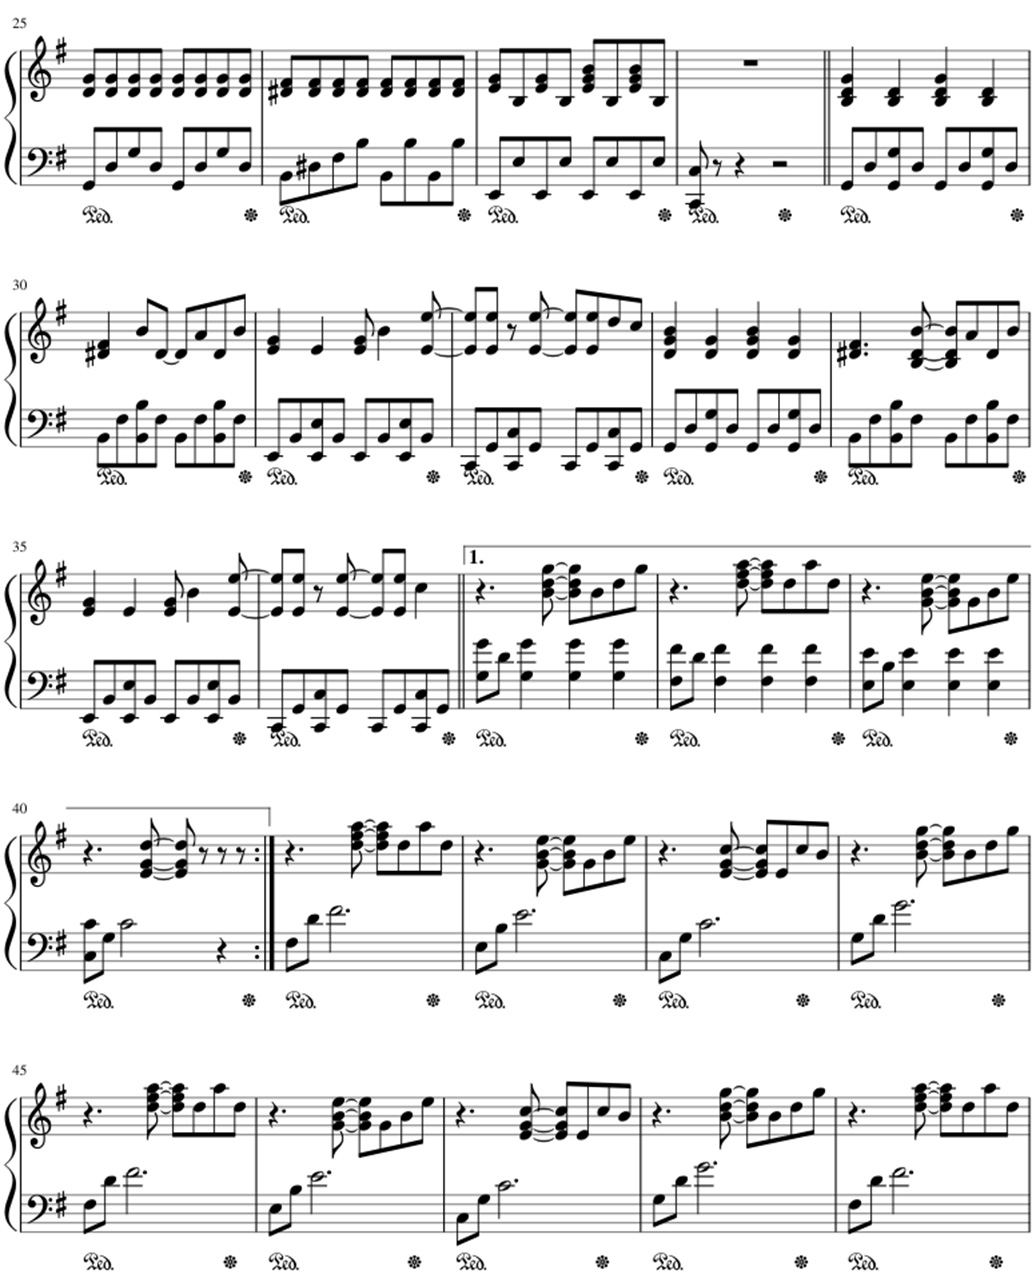 Don't Cry sheet music notes 2